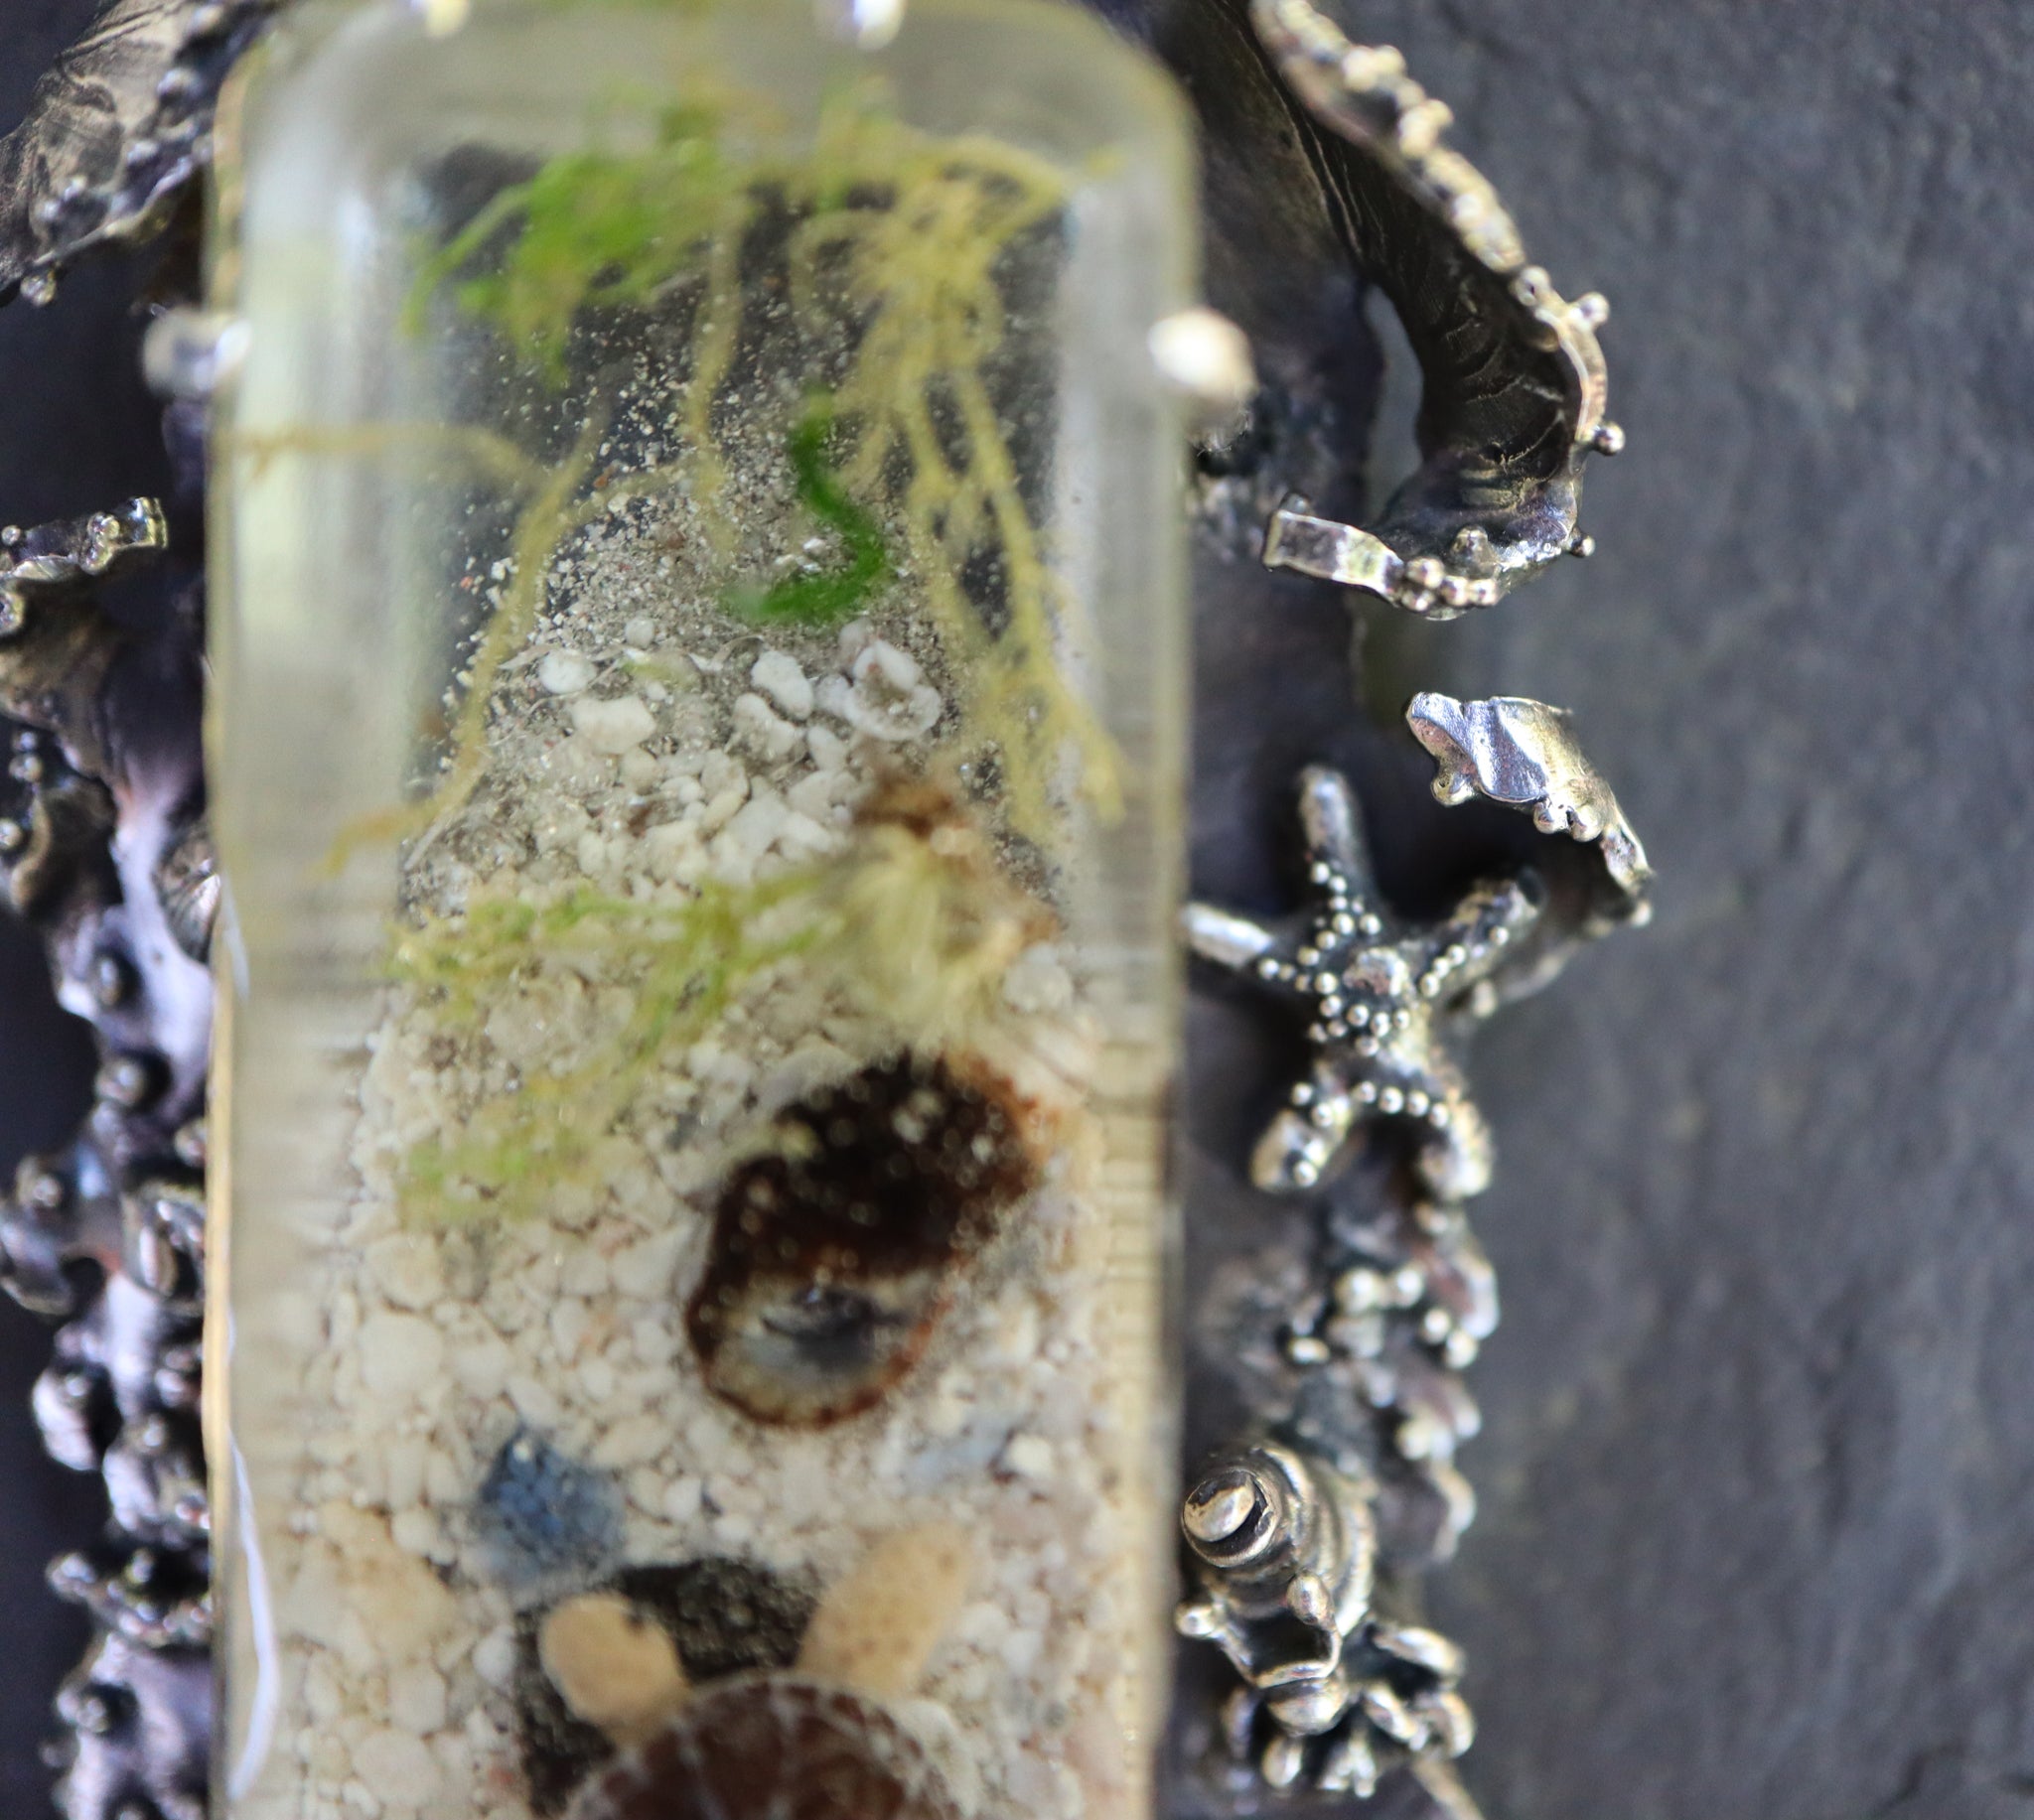 A close up photo of where the sand ends within the resin piece and a closer photo of the starfish. 